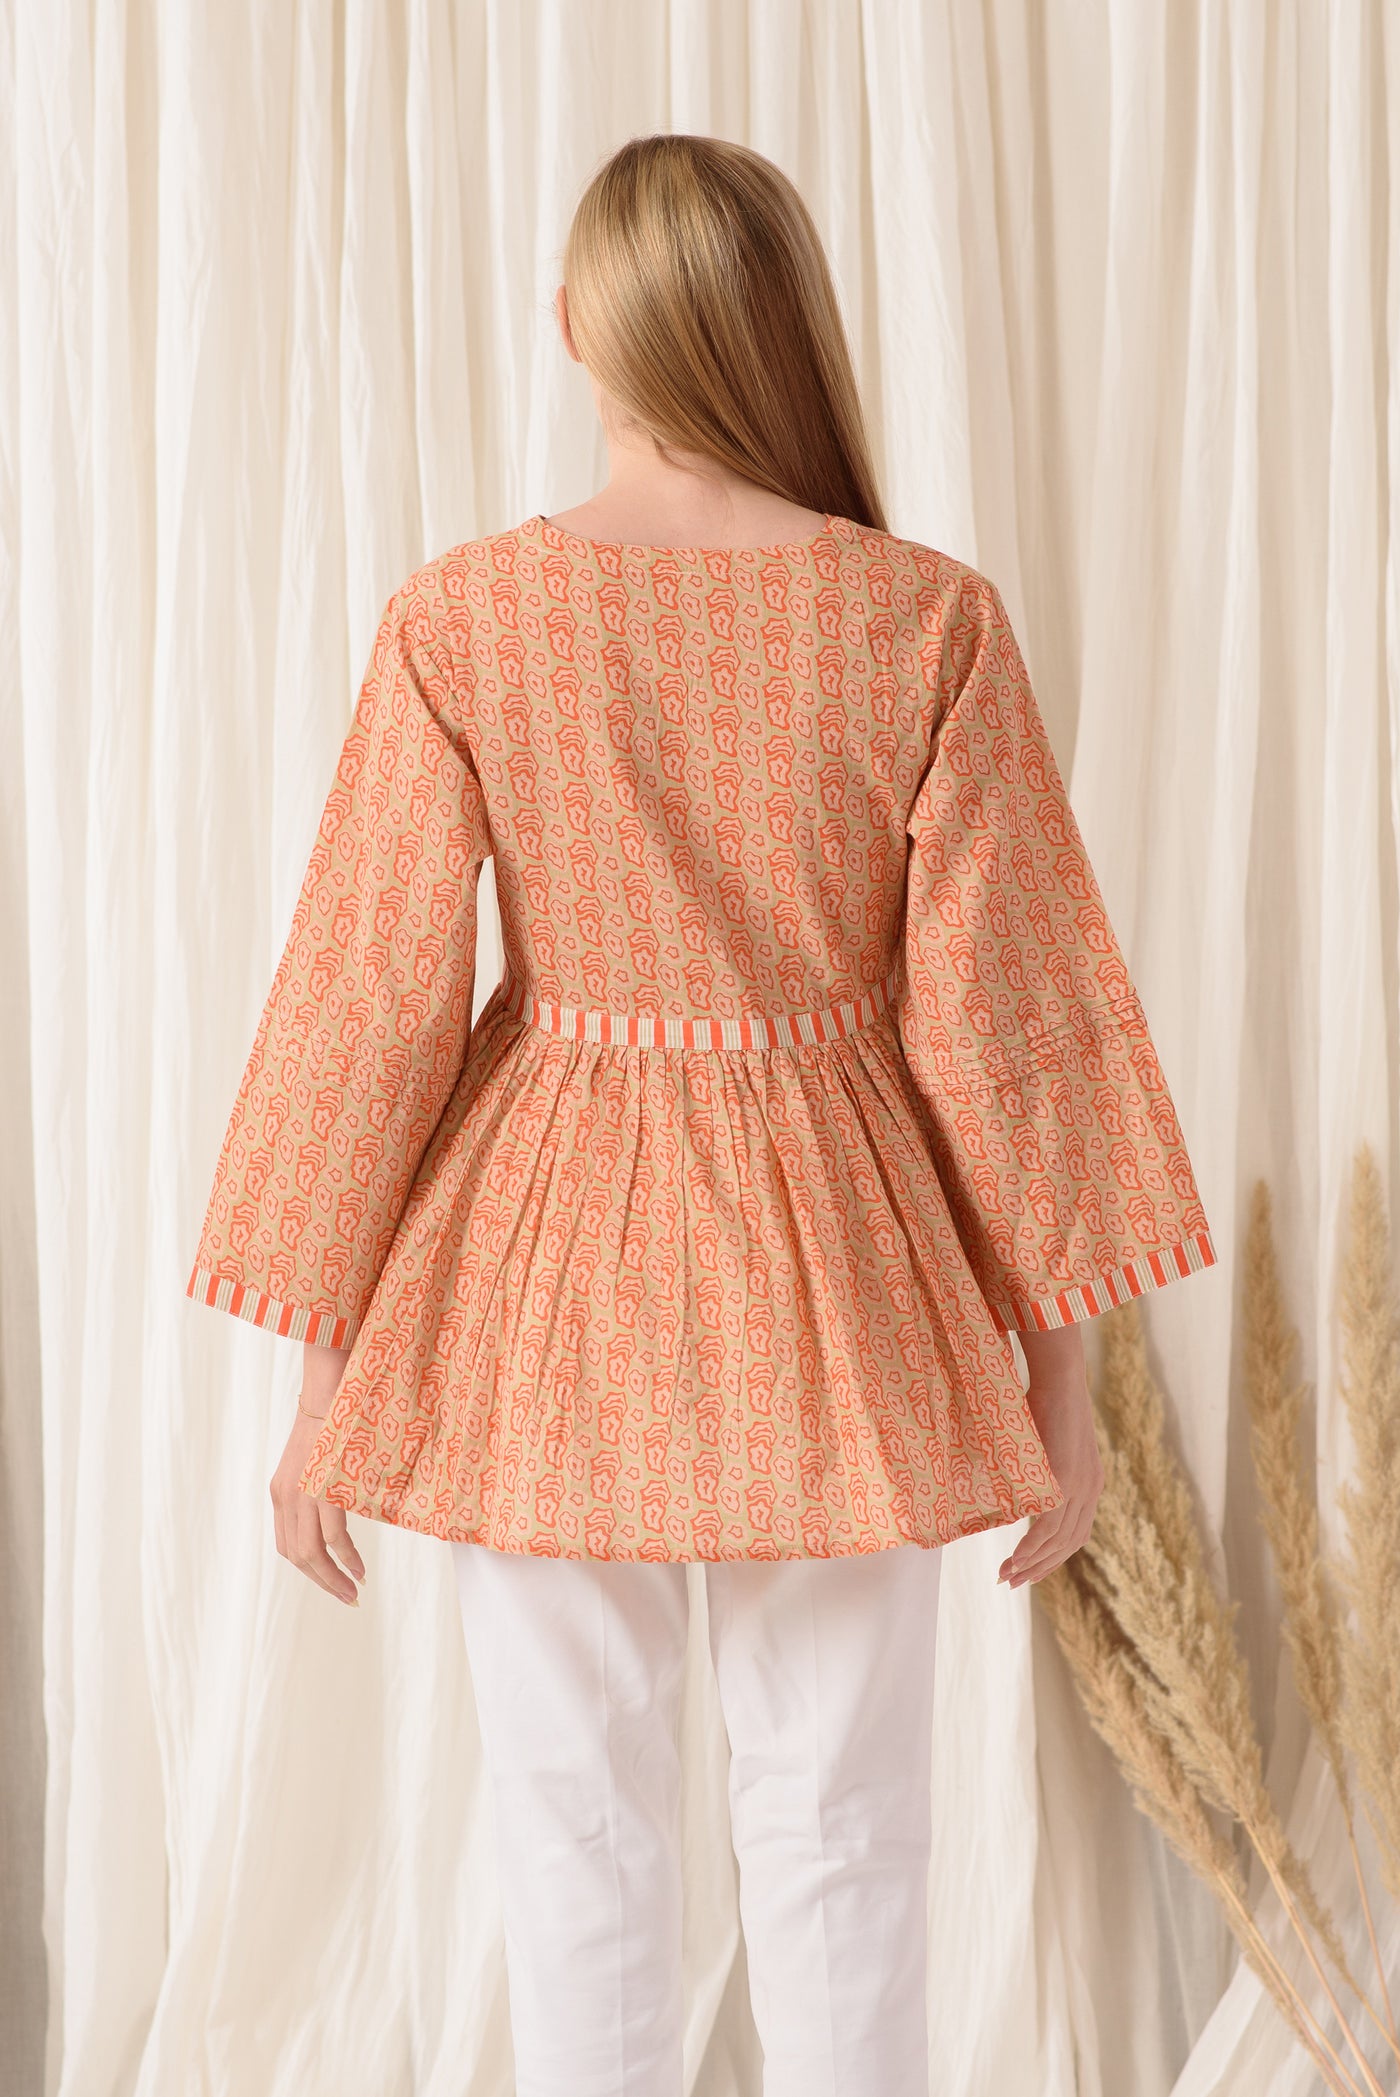 THE PLEATED TOP IN TANGY ORANGE